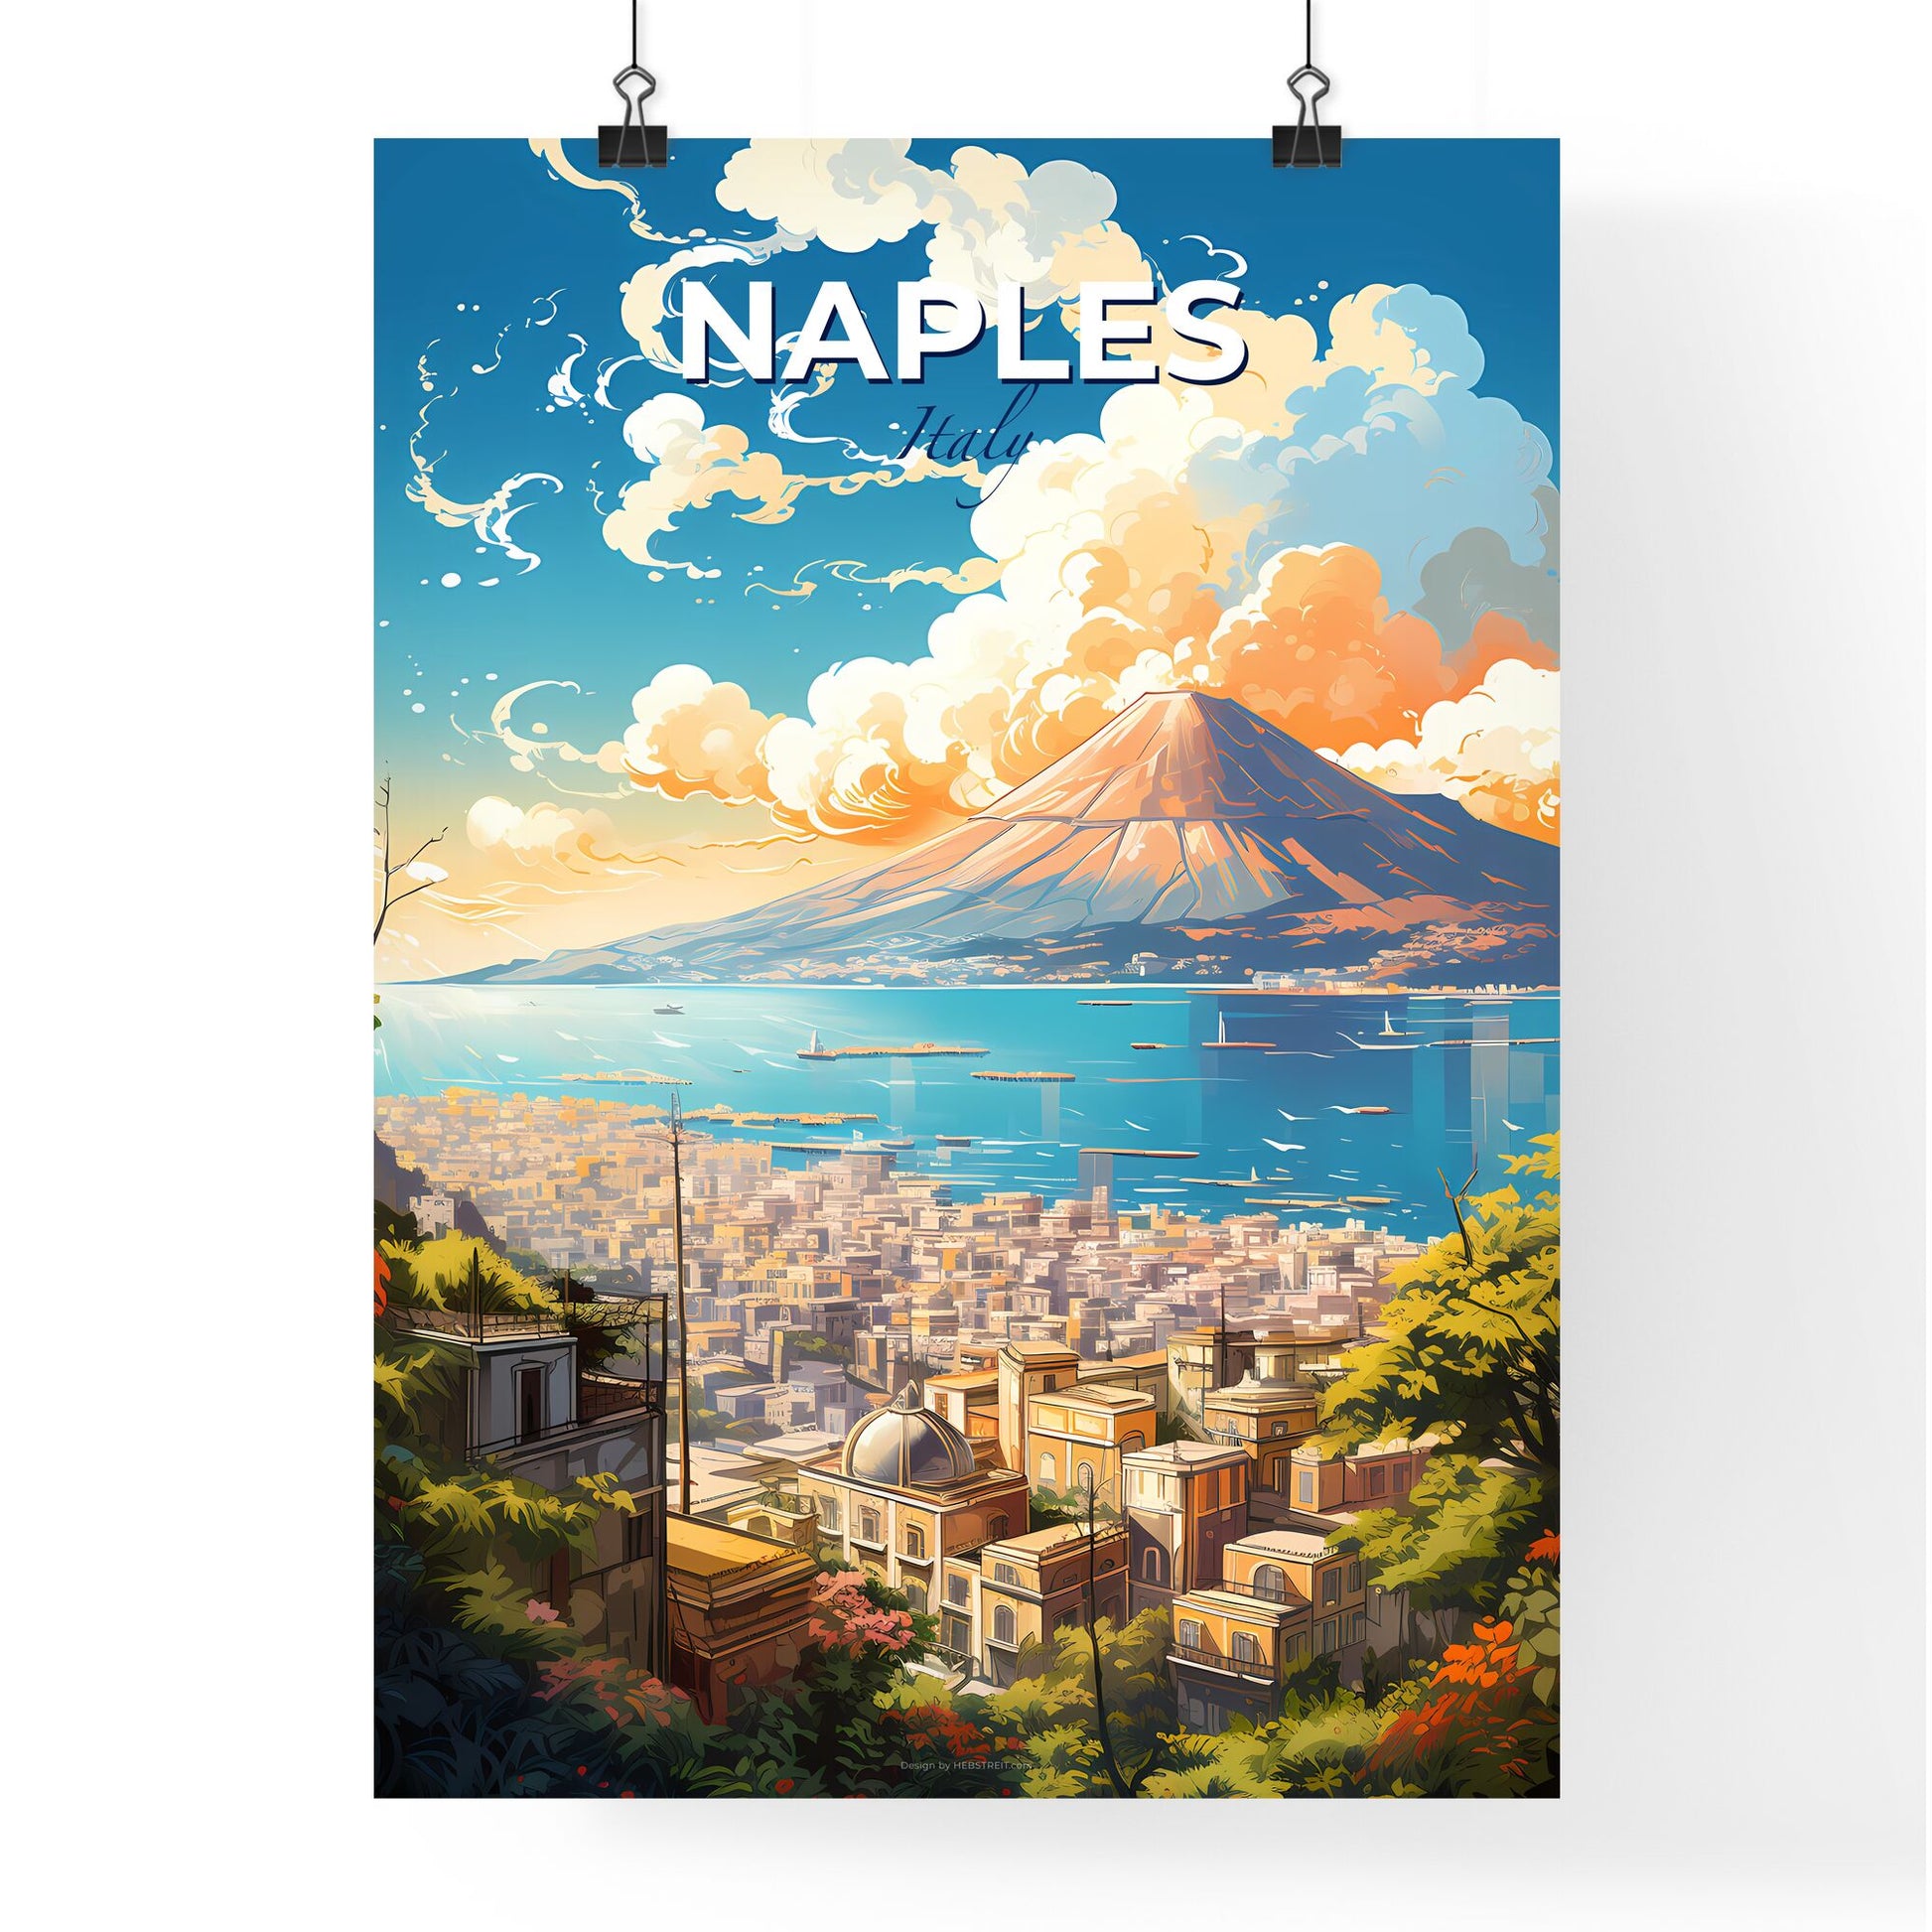 Naples Italy Skyline - A Landscape Of A City With A Mountain In The Background - Customizable Travel Gift Default Title